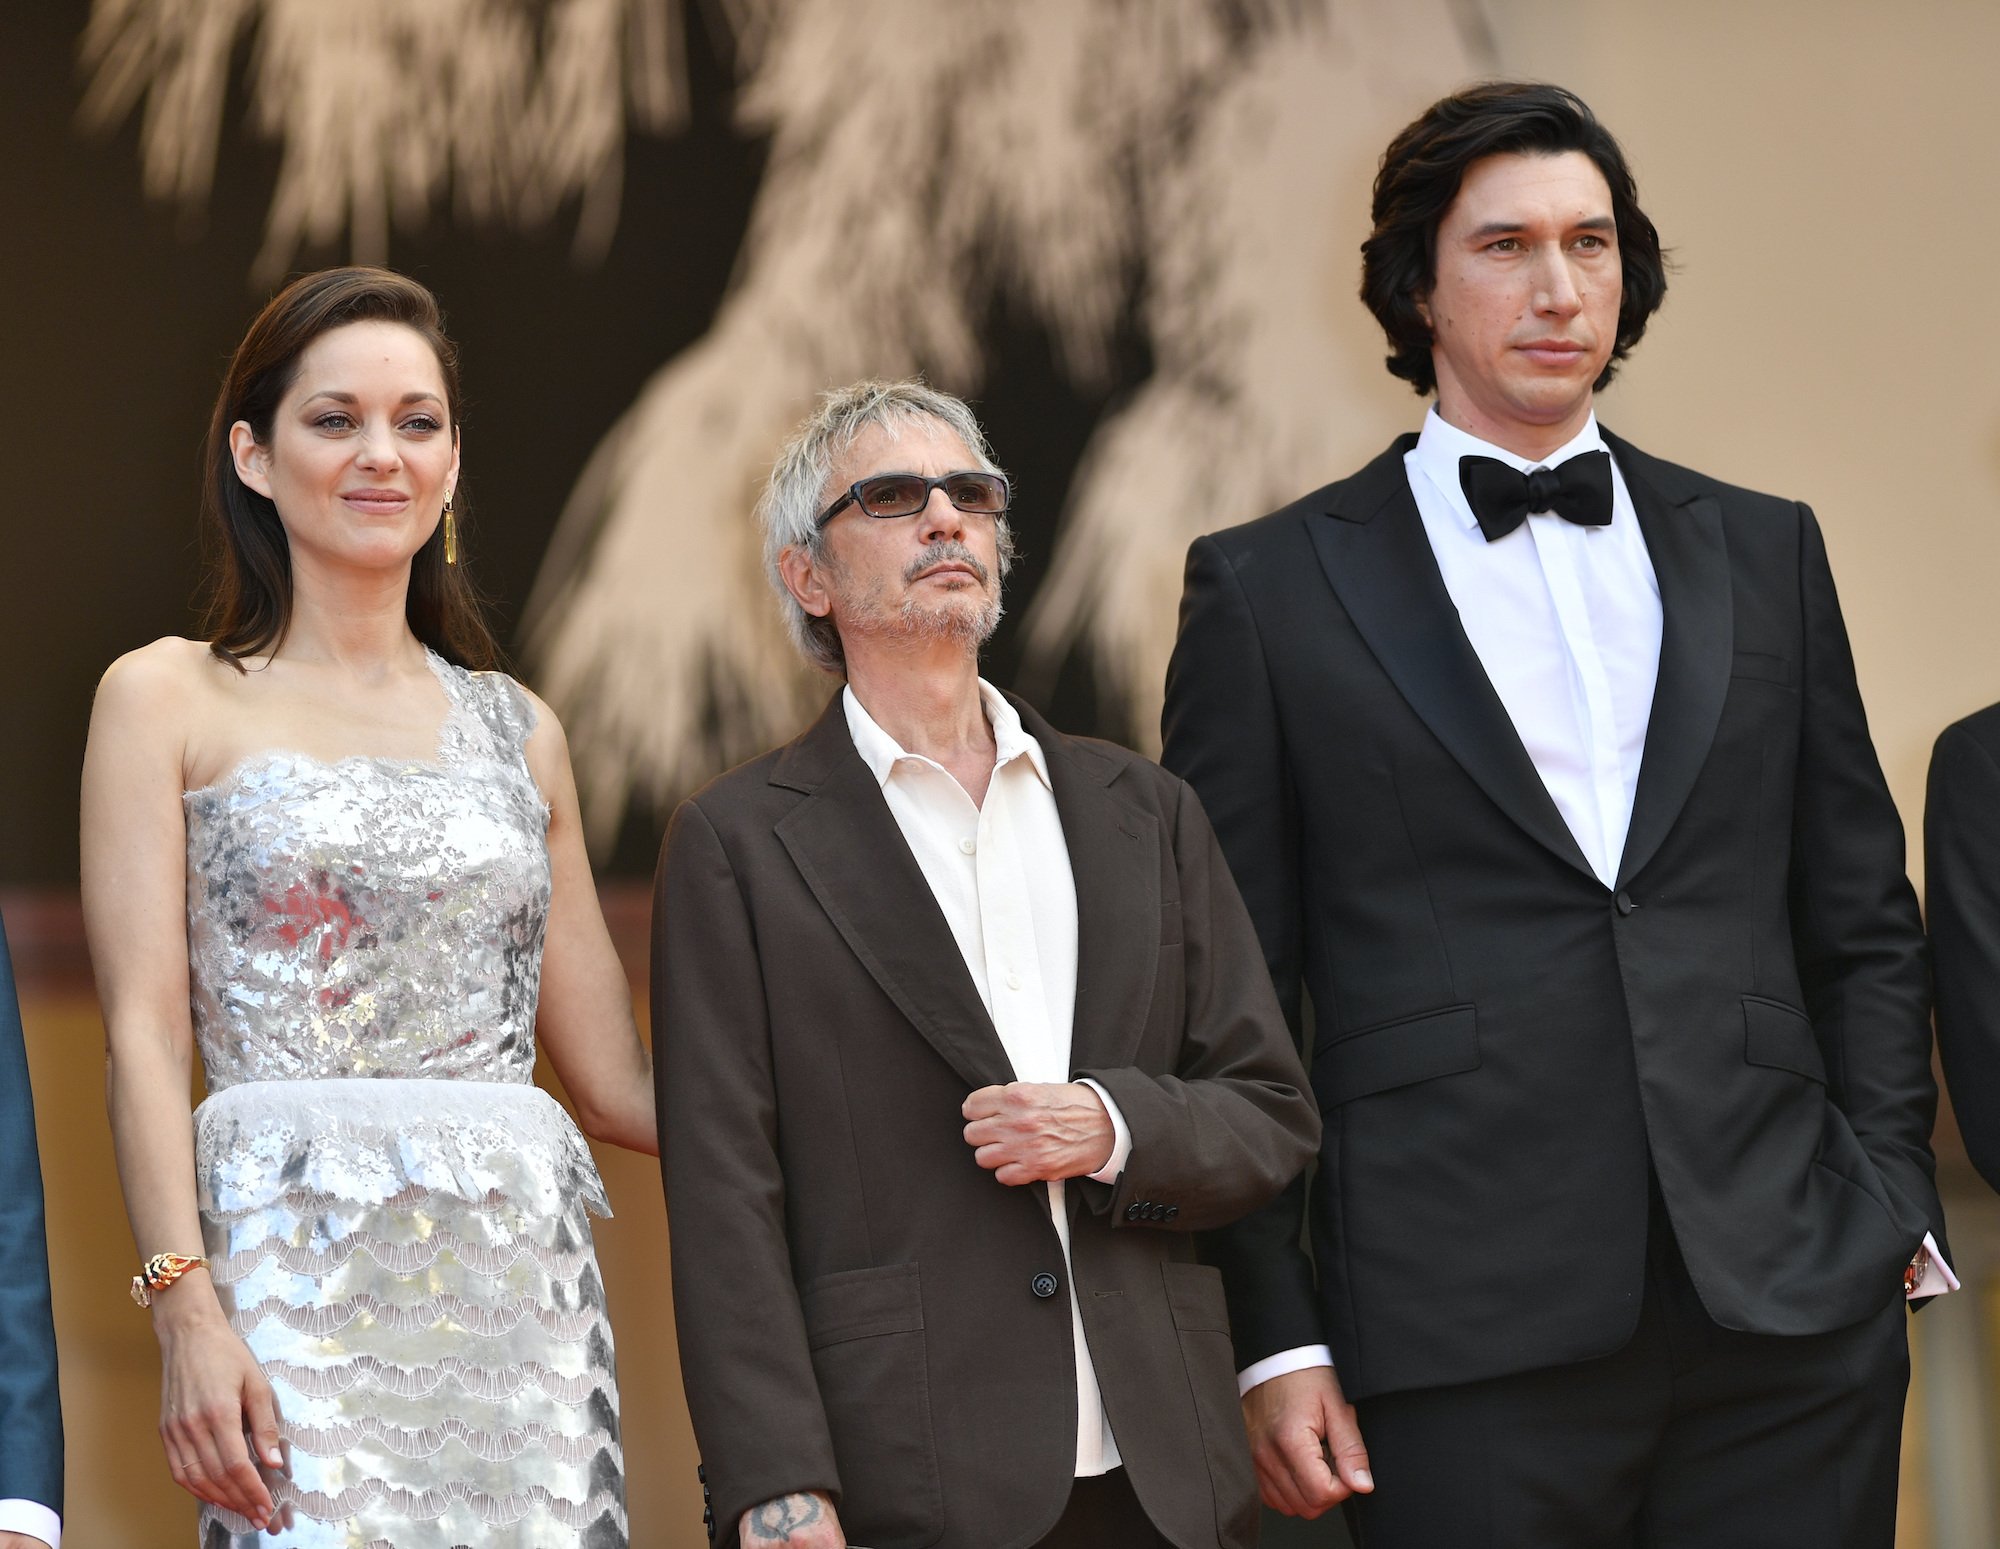 French actor Marion Cotillard, French film director Leos Carax, and US actor Adam Driver arrive for the screening of the film 'Annette' in competition and the Opening Ceremony of the 74th annual Cannes Film Festival